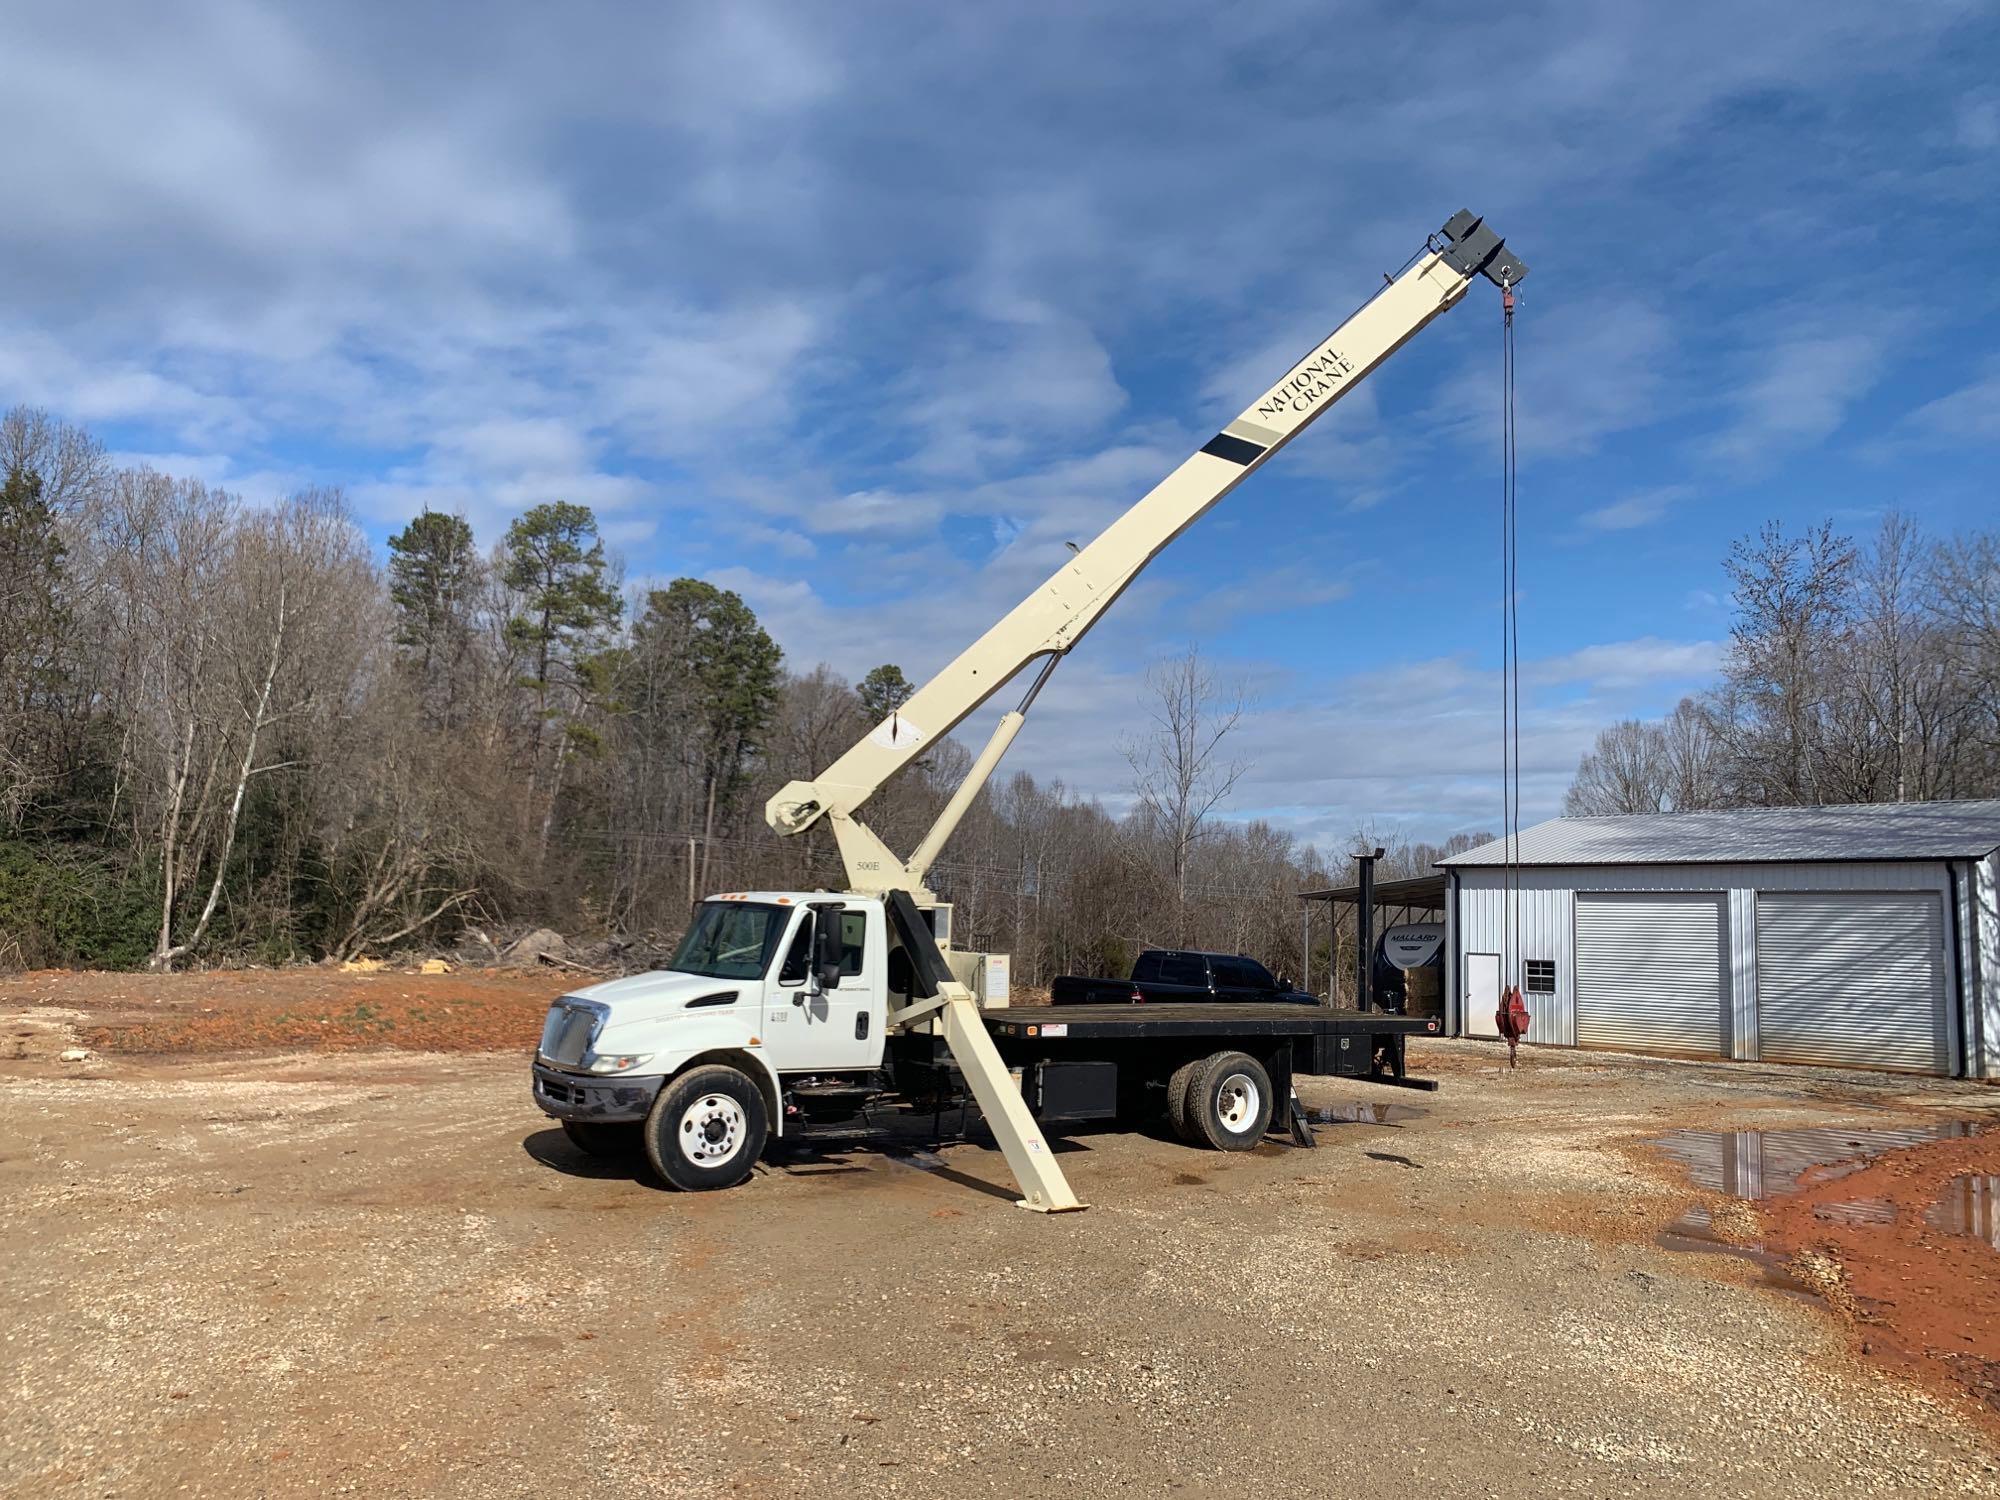 2006 INTERNATIONAL 4200 S/A 18 TON NATIONAL 500E BOOM TRUCK - LOW MILES GREAT SHAPE